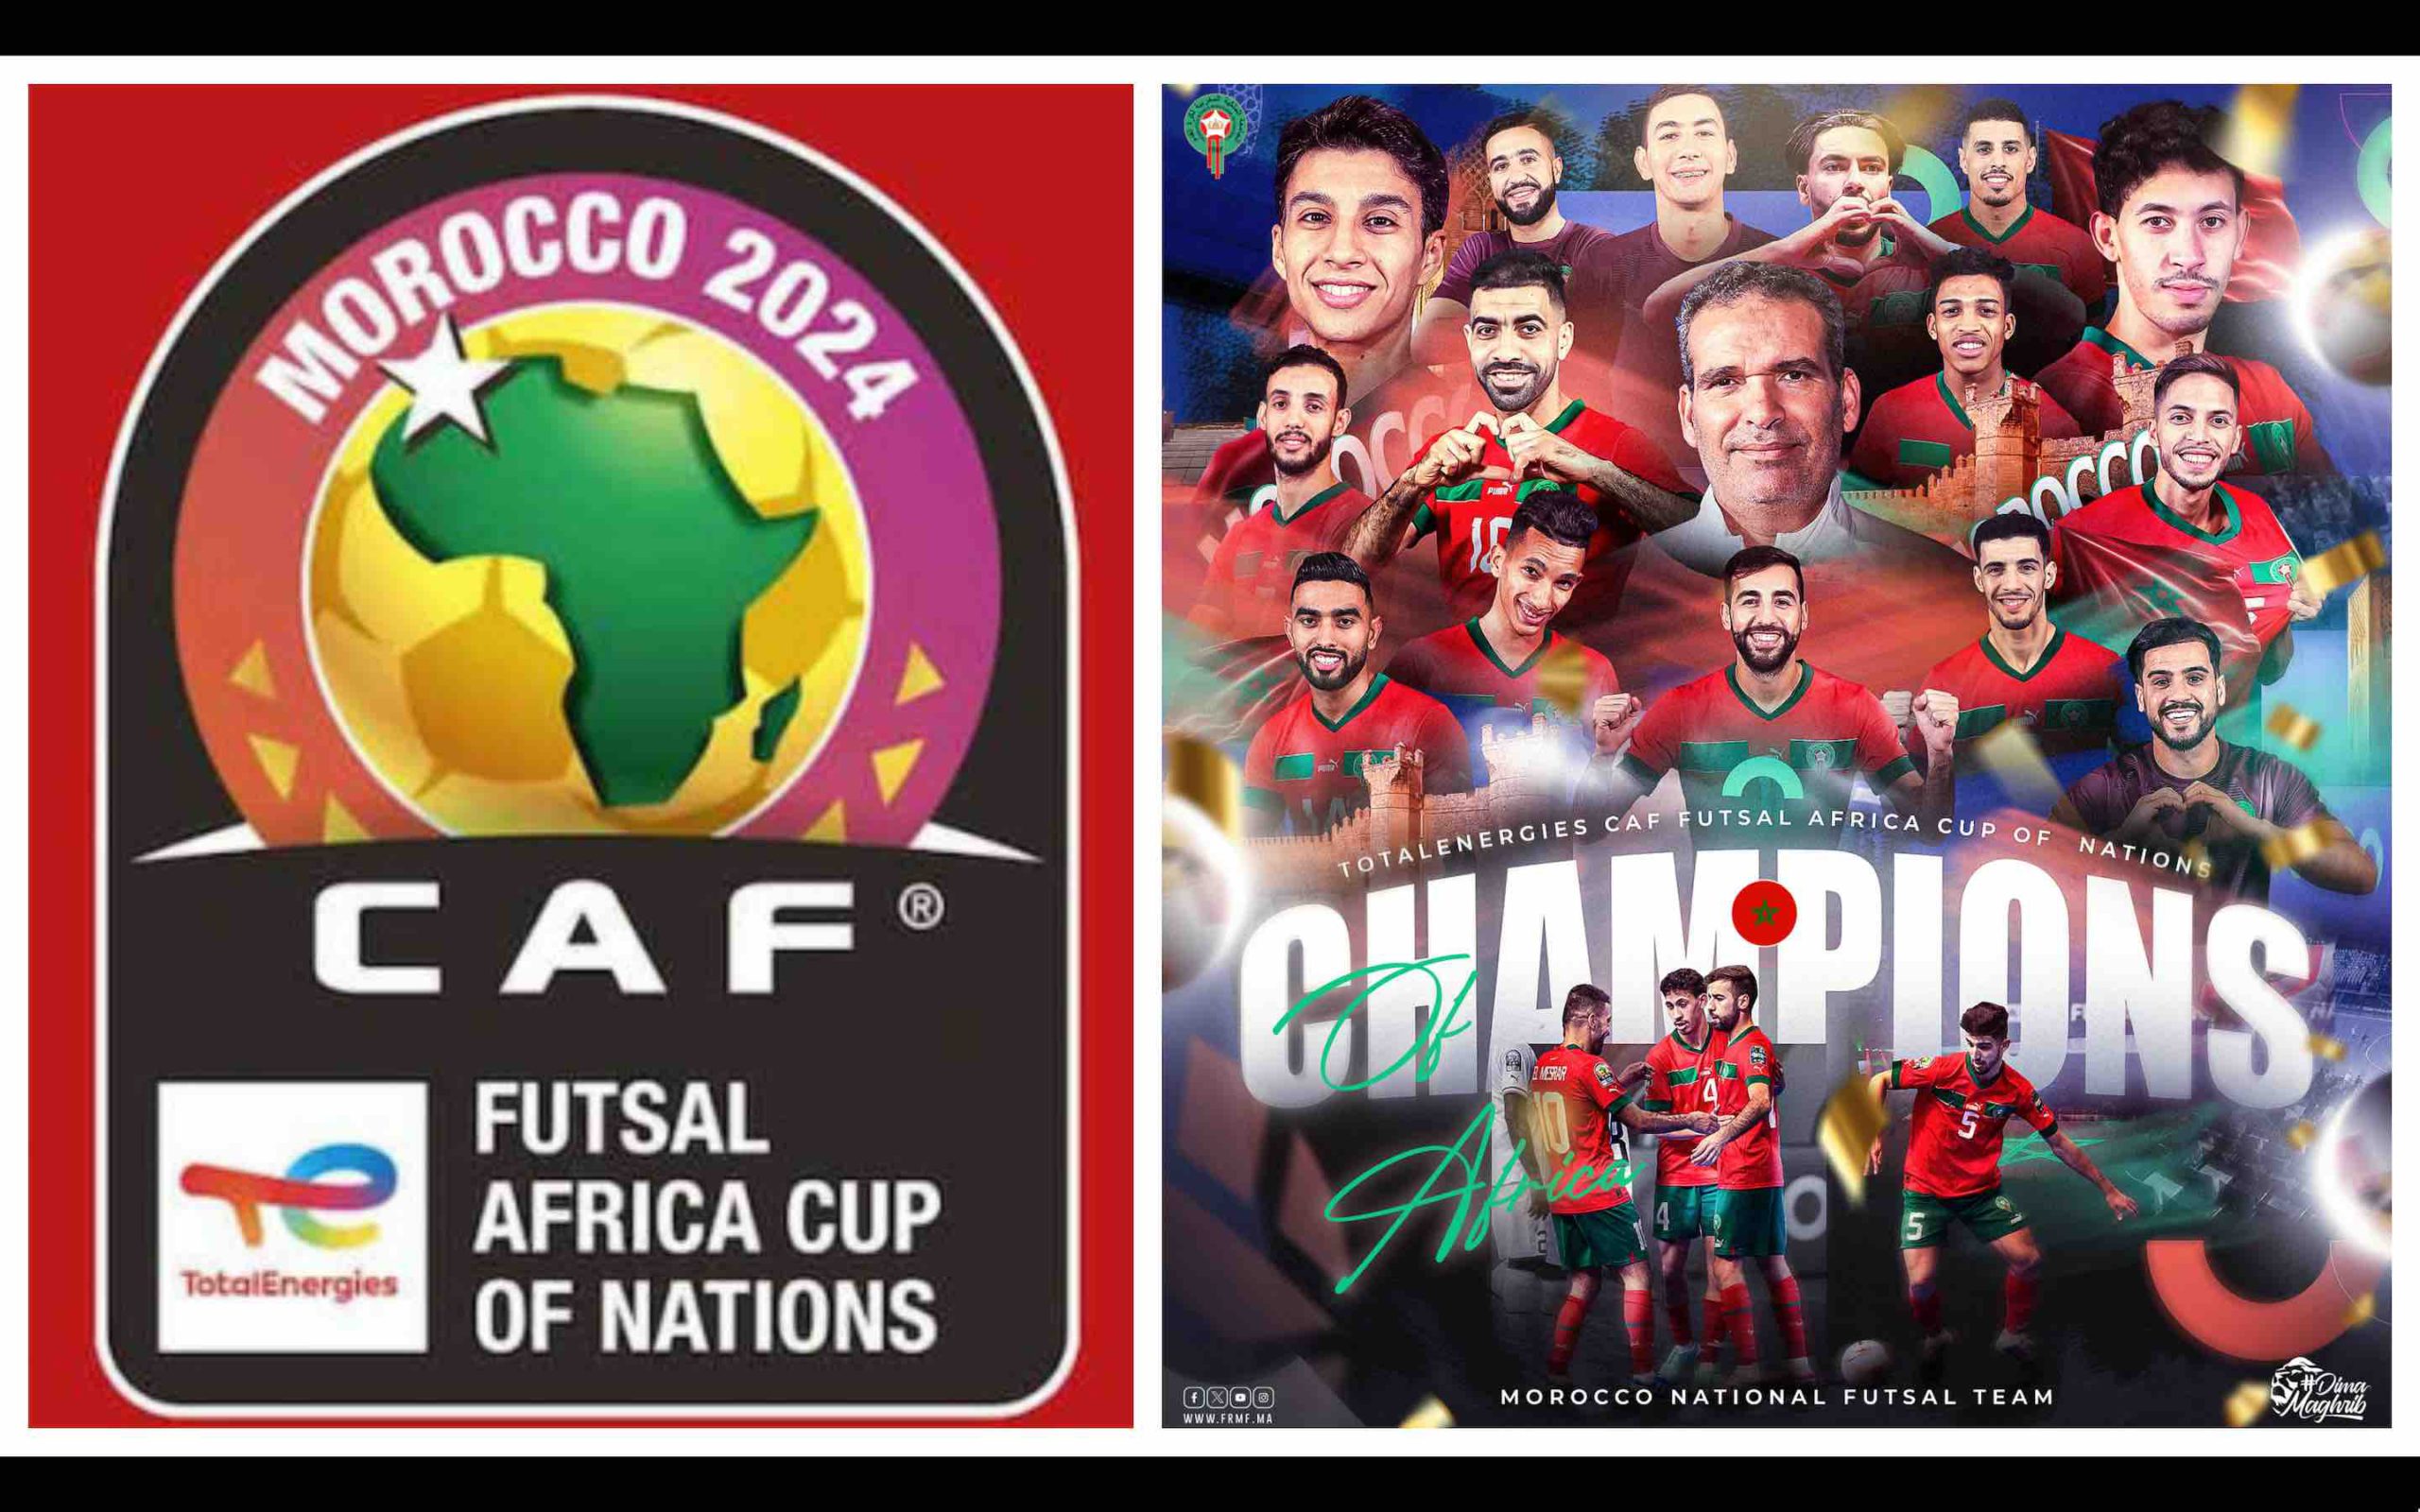 CAN Coupe Afrique nations futsal Maroc 2024 Morocco Africa Cup Of Nations